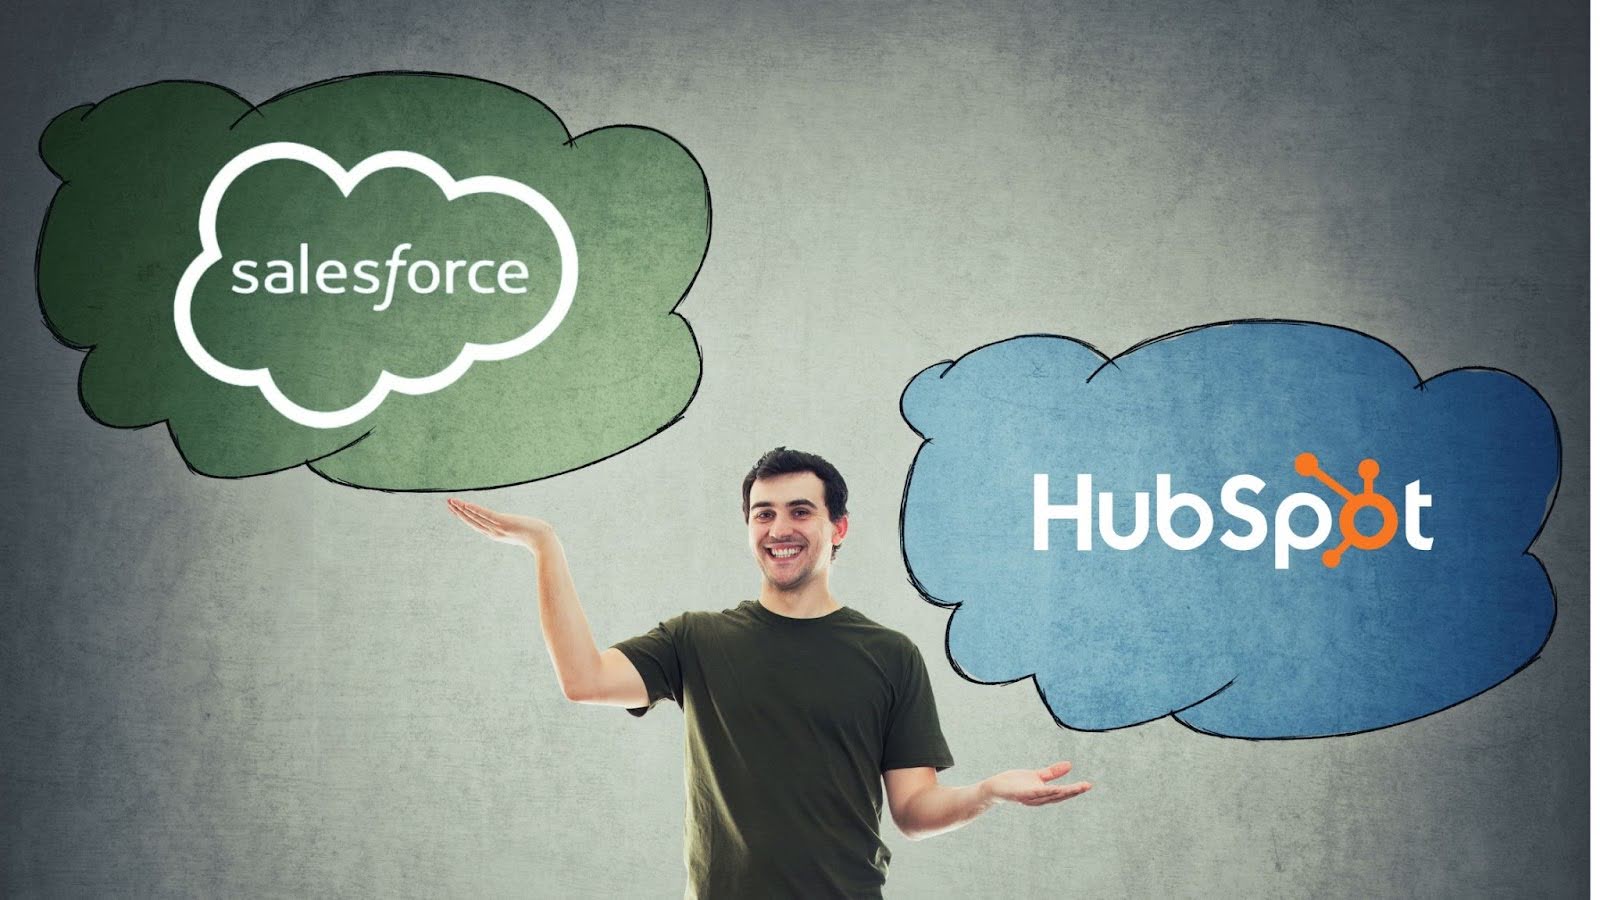 Salesforce vs HubSpot: Which is the Right Choice for You?